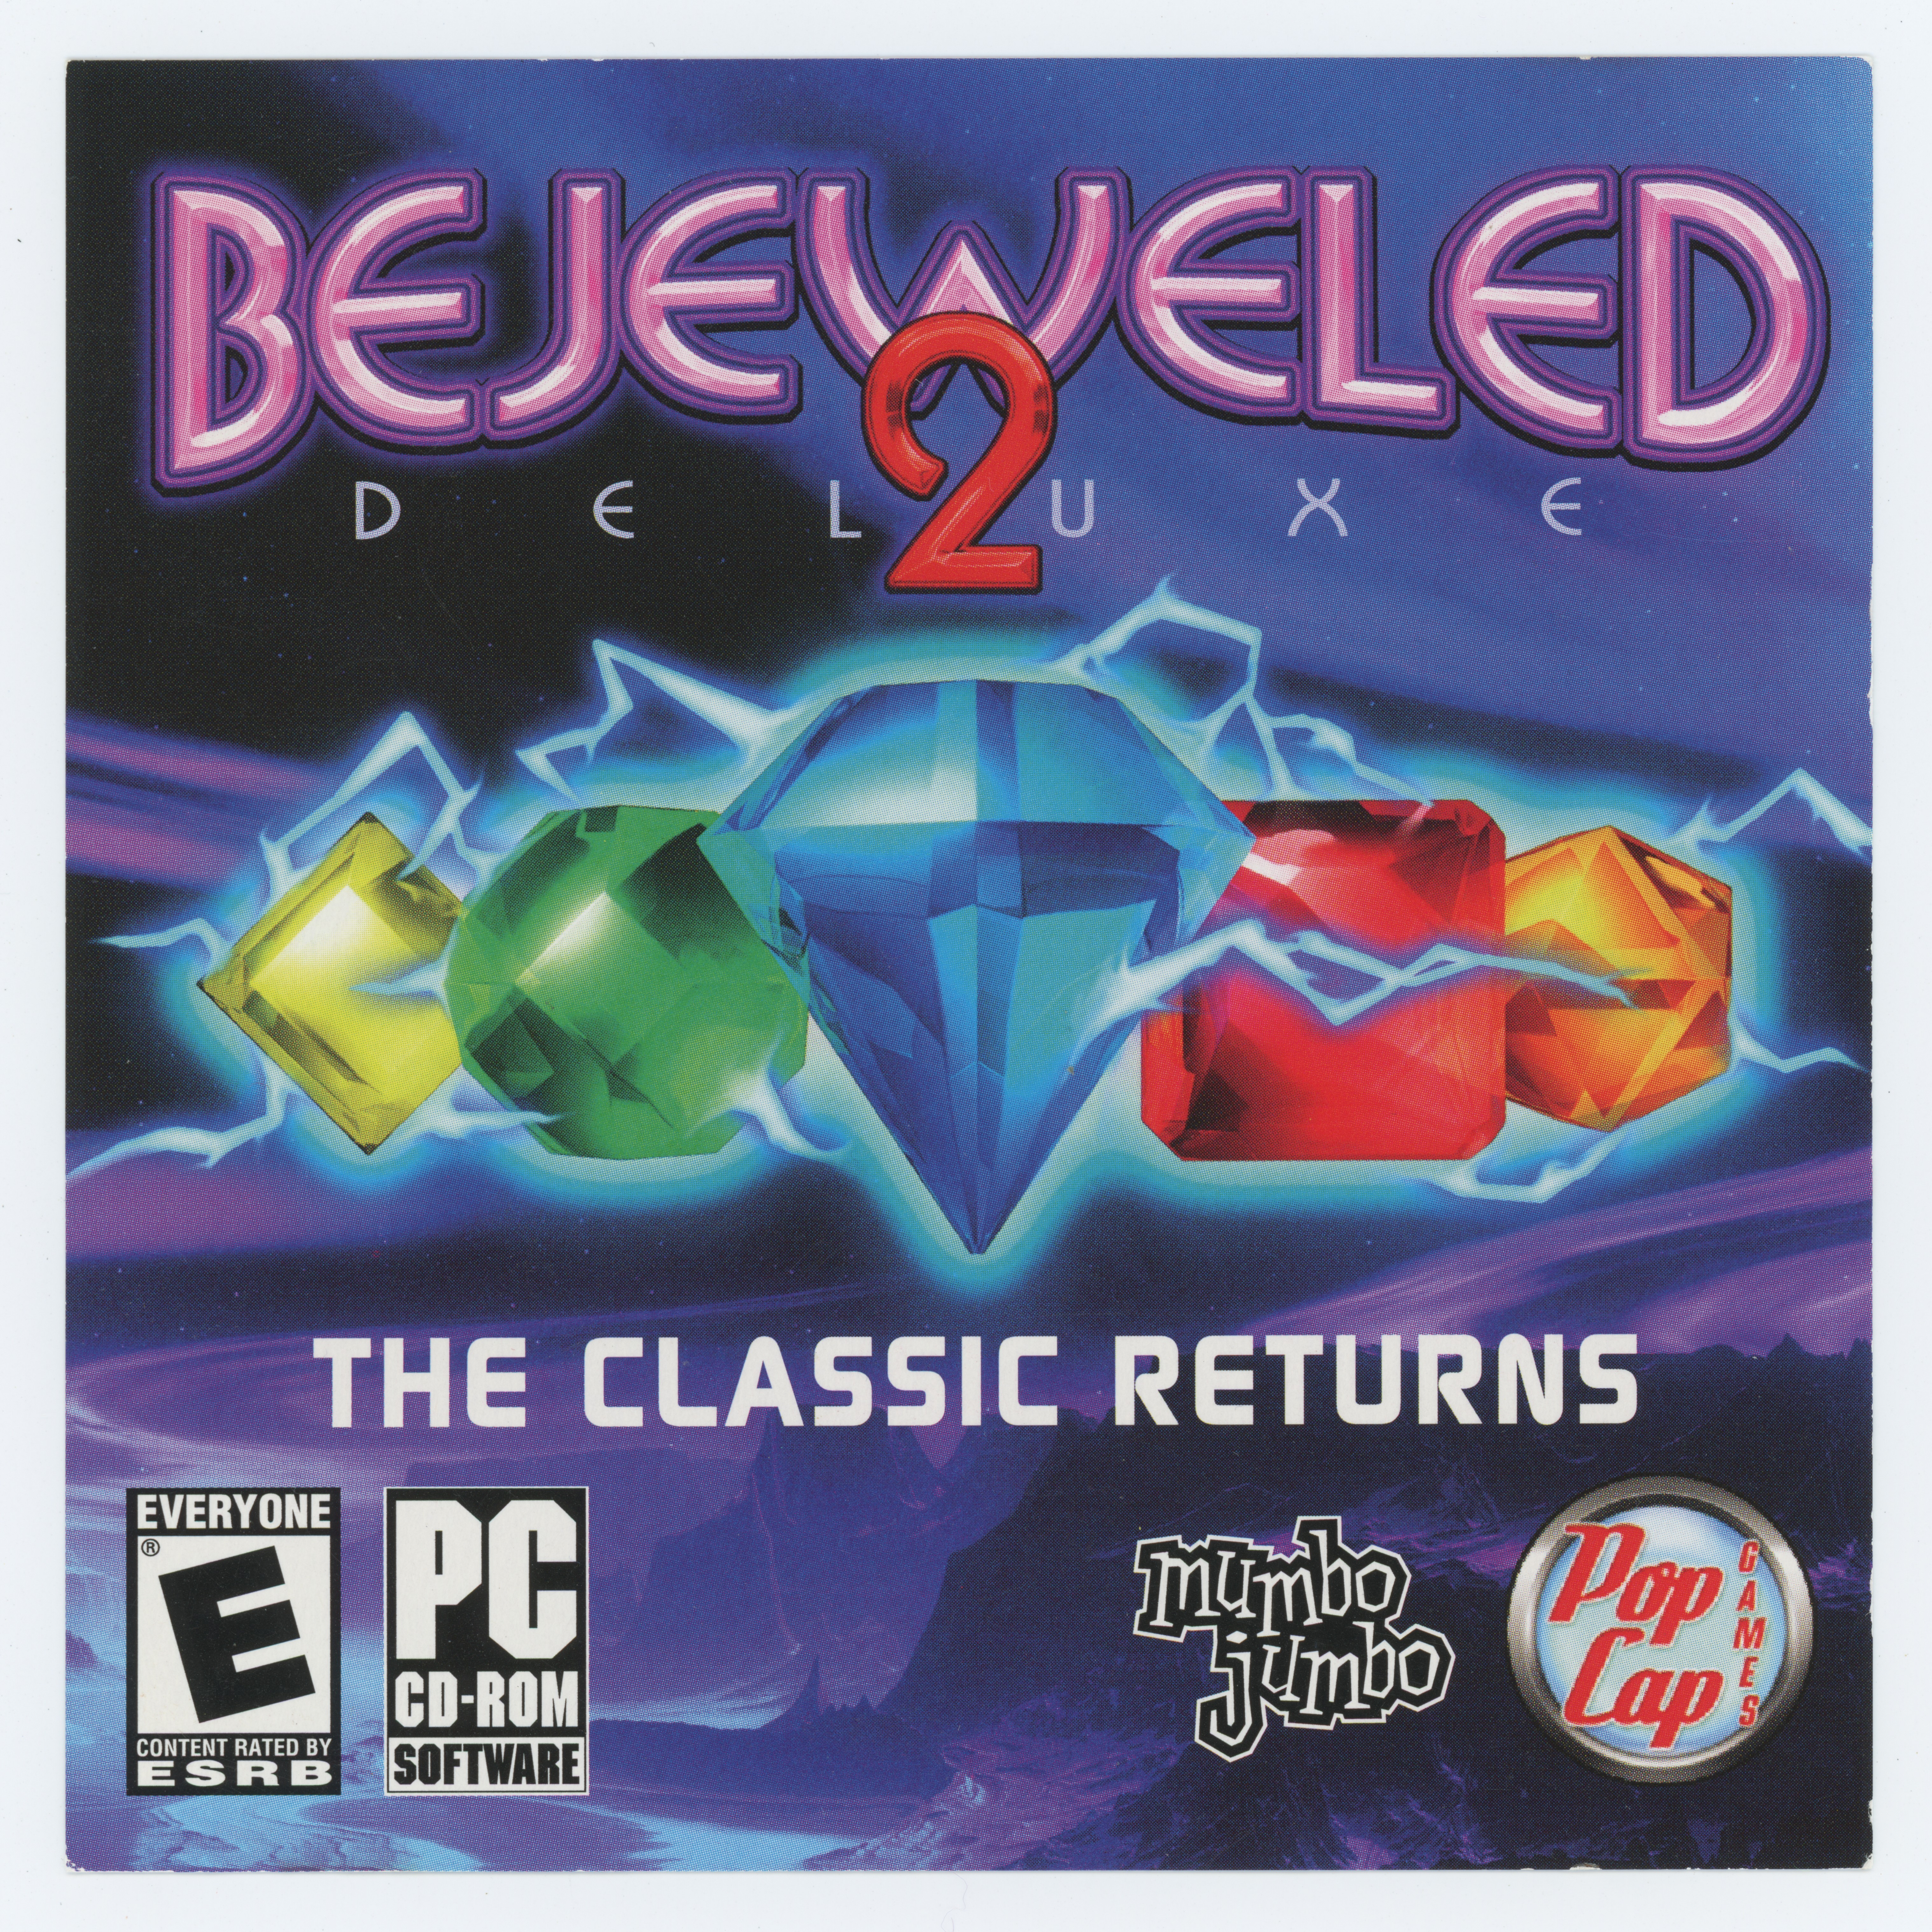 Bejeweled 2 Deluxe.exe is generally considered safe for your computer.
However, it is always recommended to download from a reputable source to avoid malware or viruses.